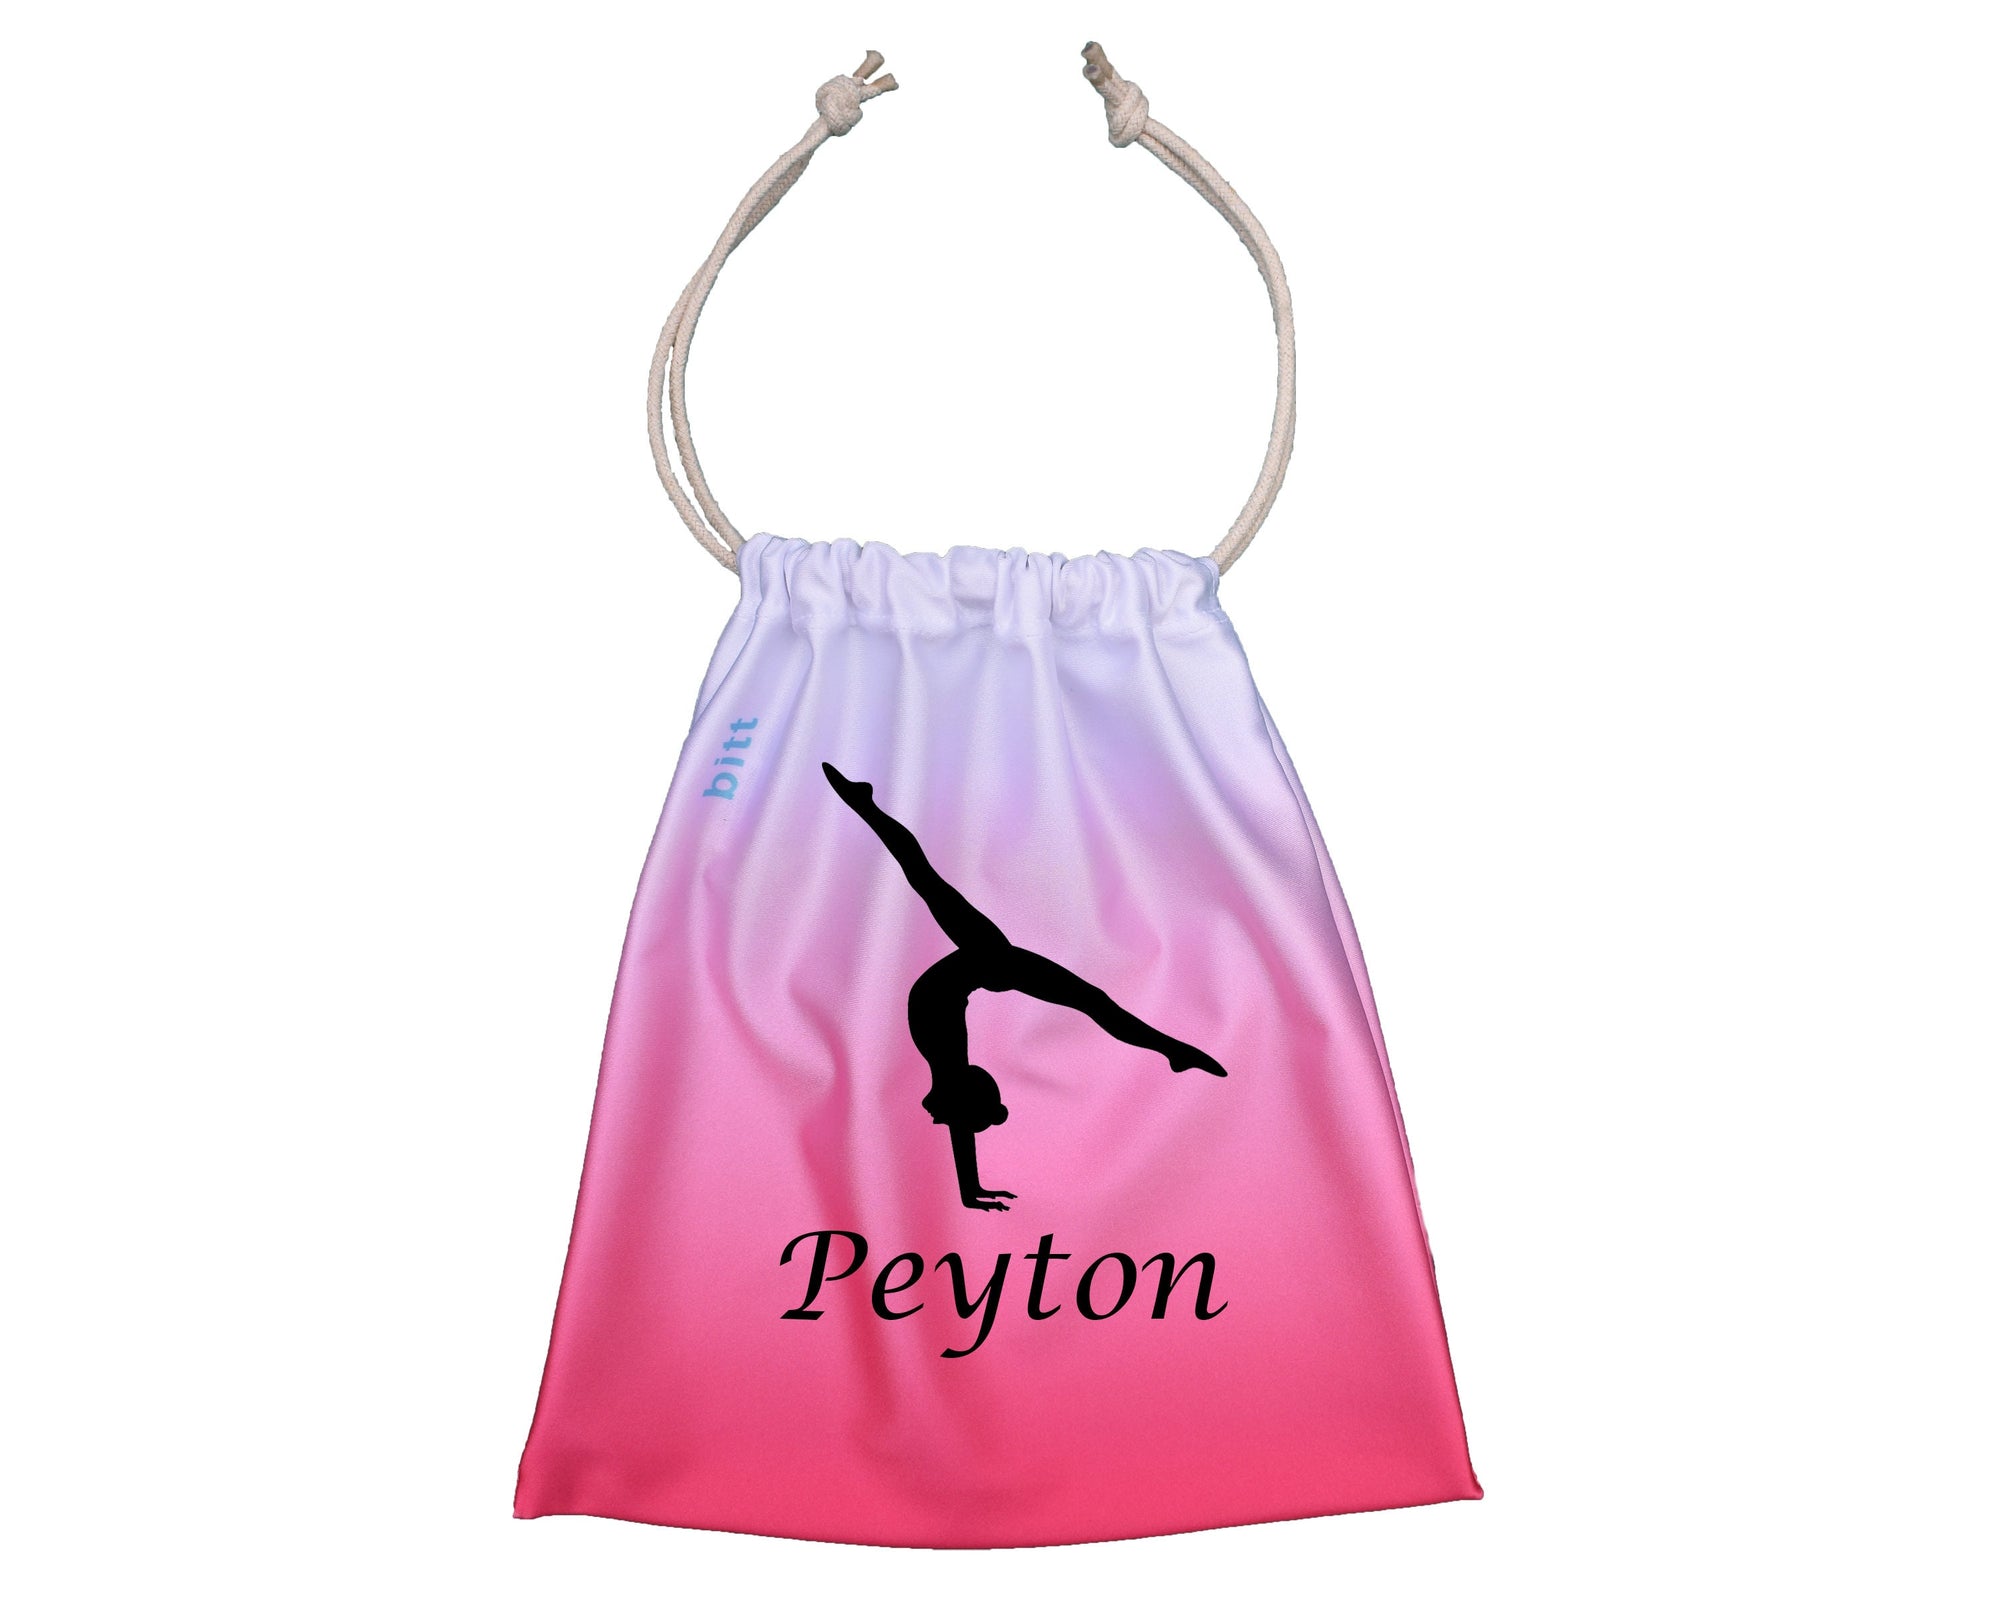 Personalized Gymnastics Grip Bag with Handstand in Dark Coral & White Ombre